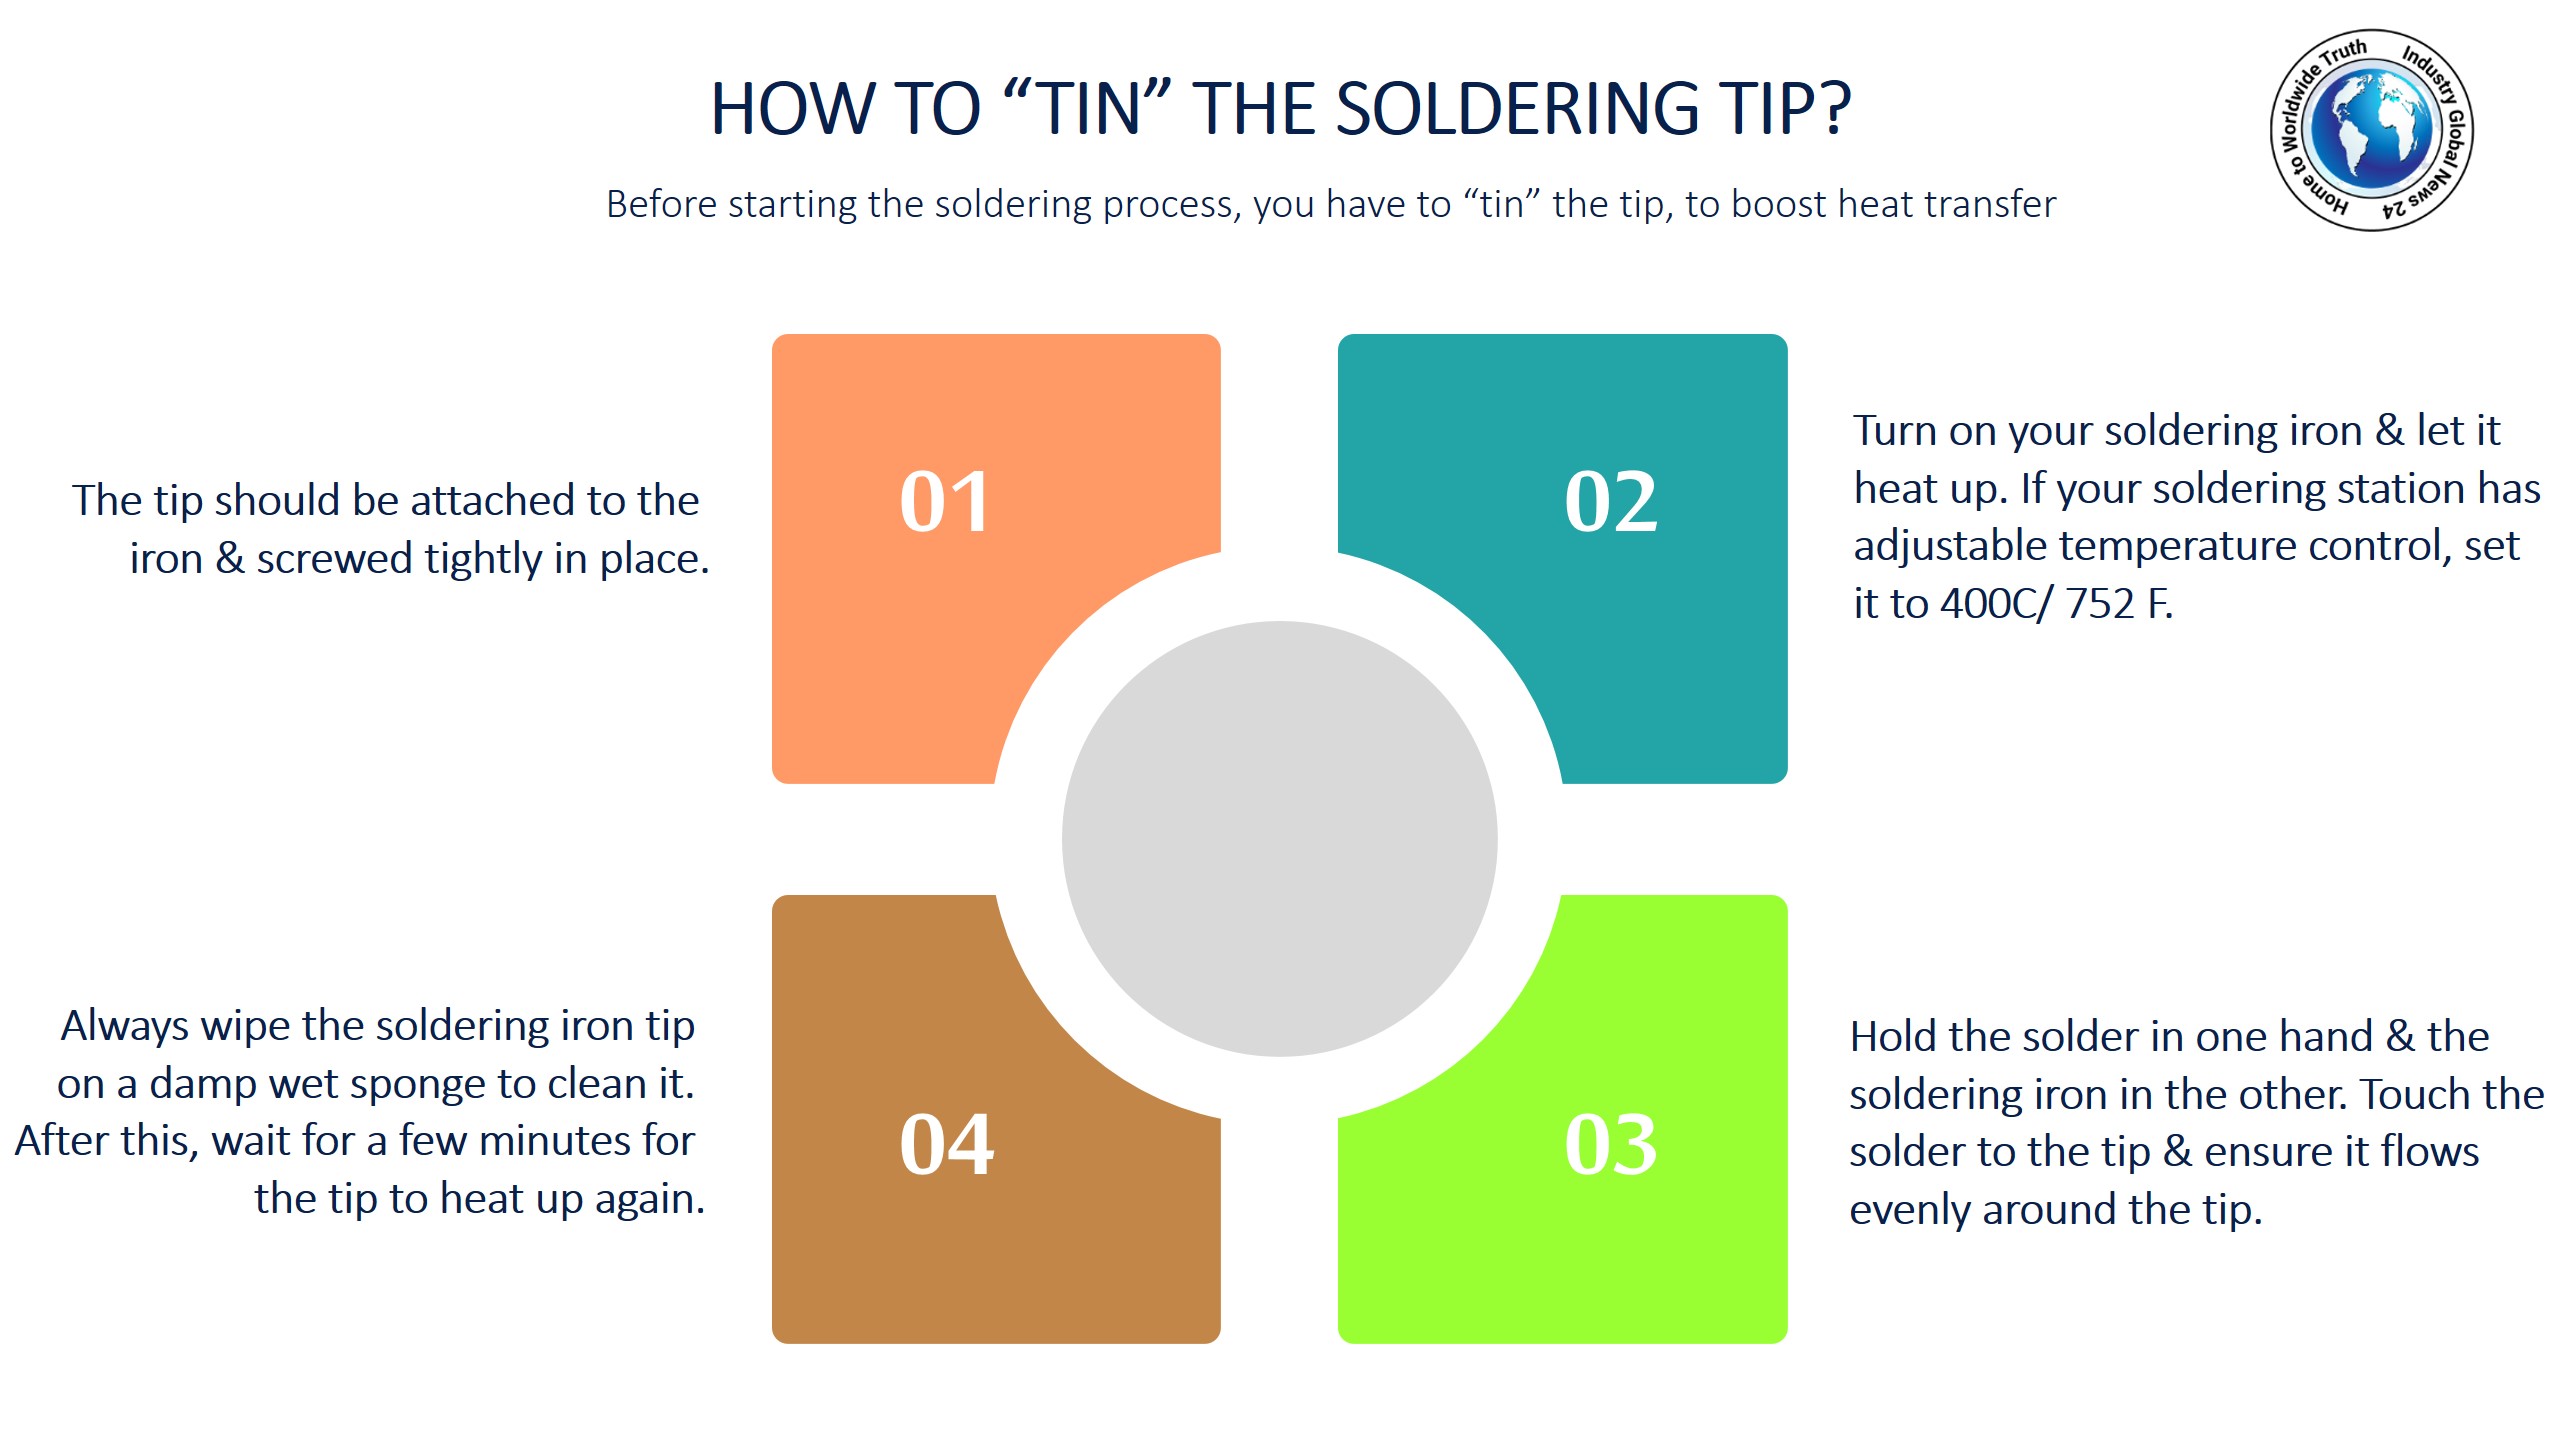 How to “tin” the soldering tip